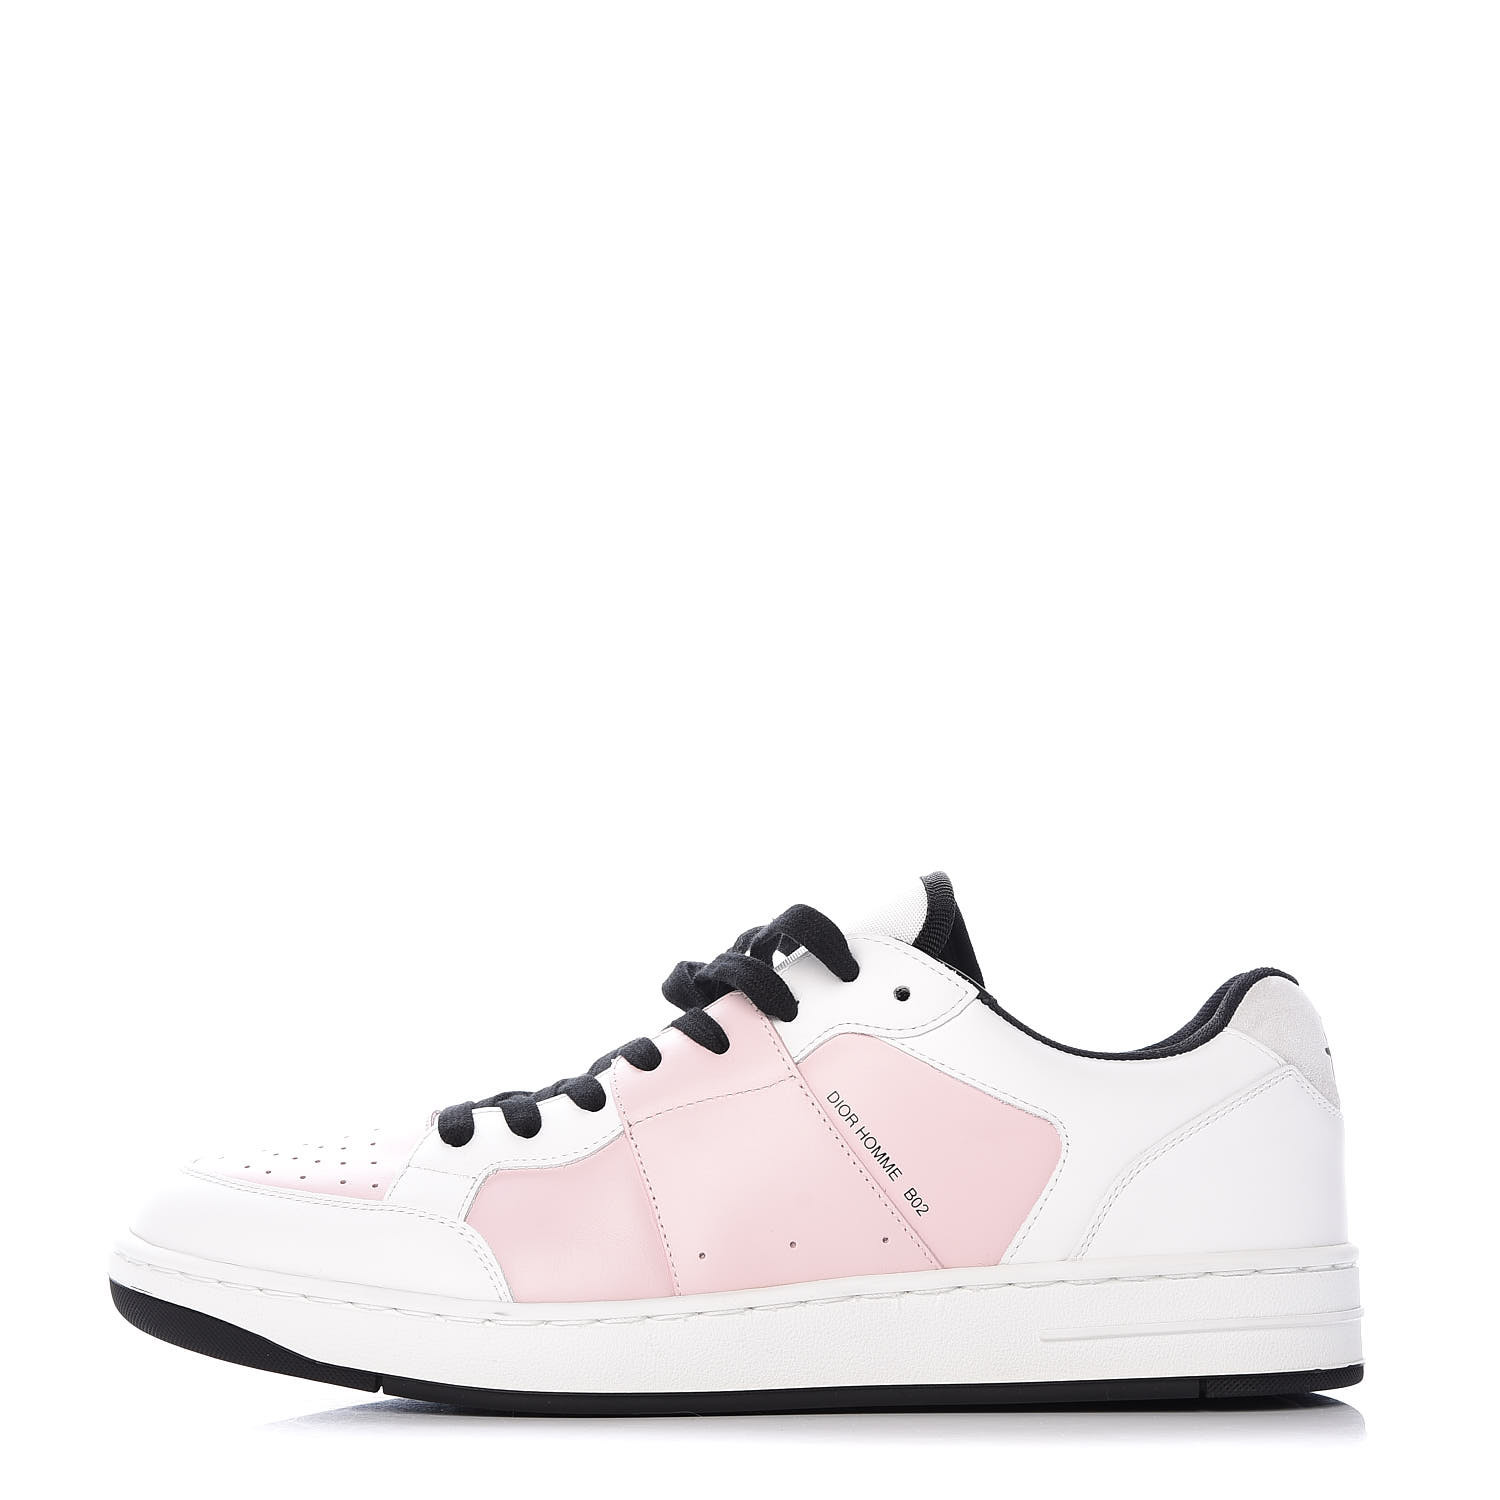 CHRISTIAN DIOR Homme Calfskin Mens BO2 Sneakers 45 White Pale Pink 411437